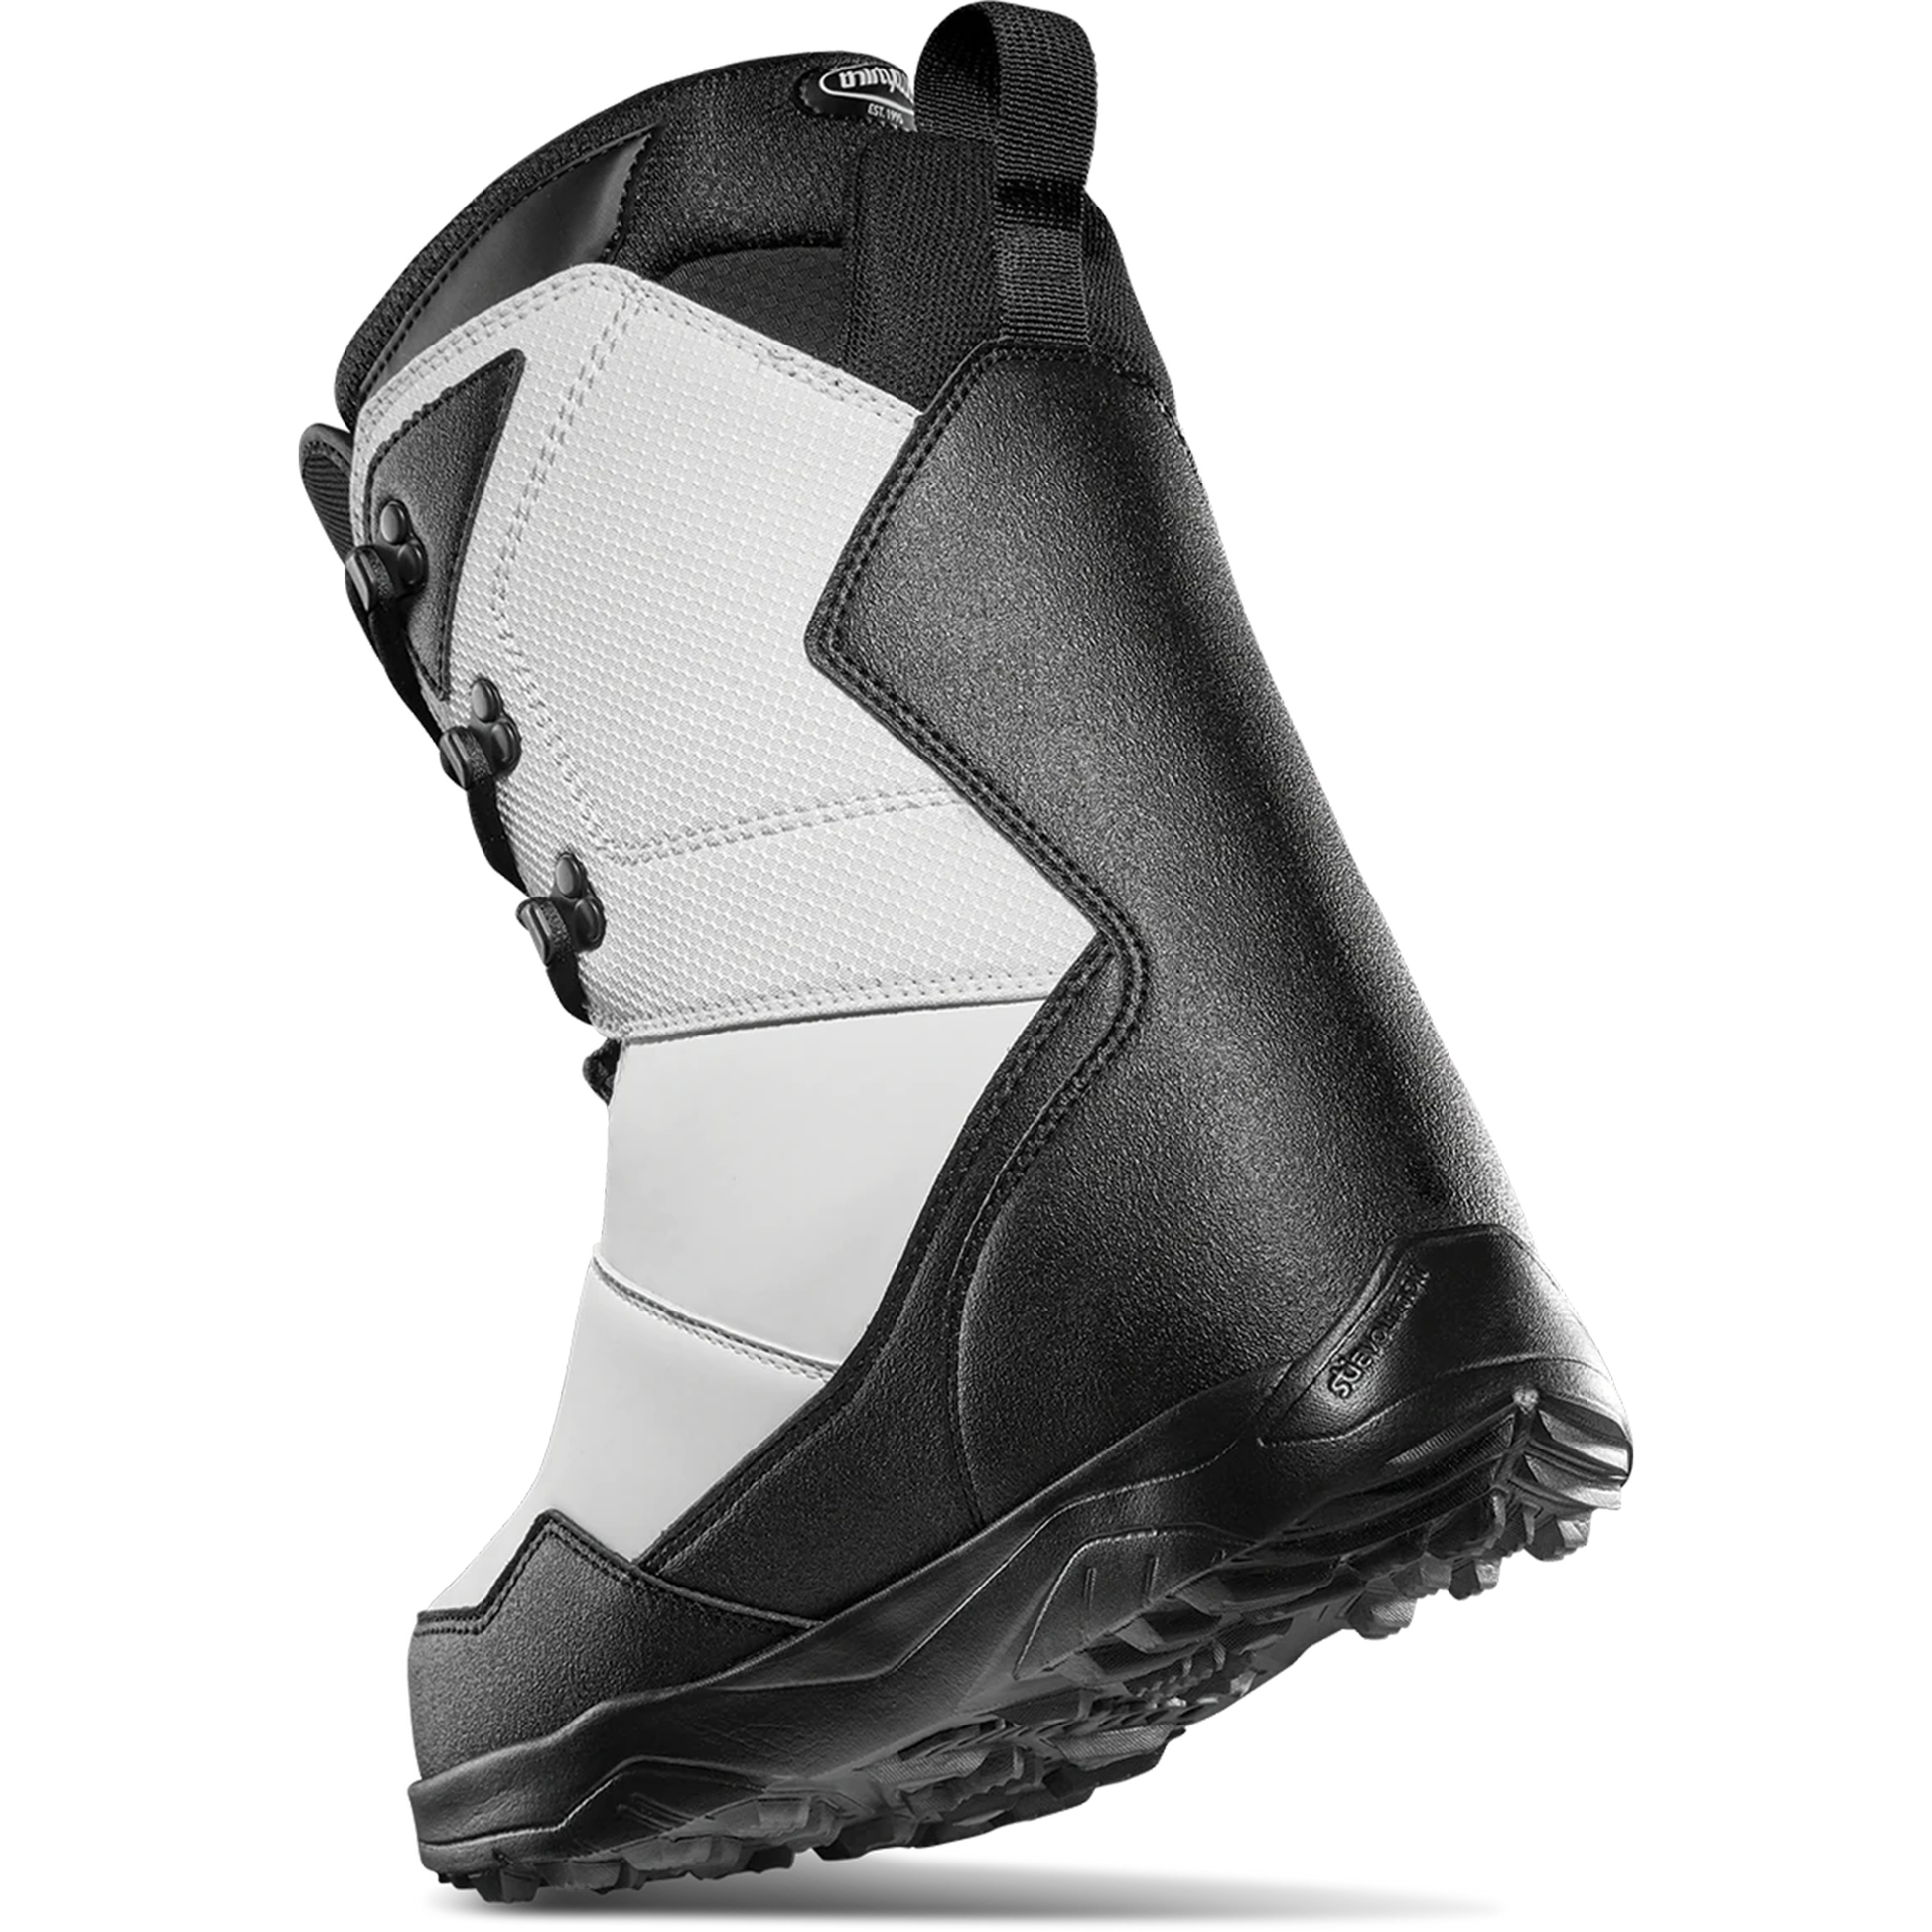 ThirtyTwo Shifty Snowboard Boots Black White Snowboard Boots